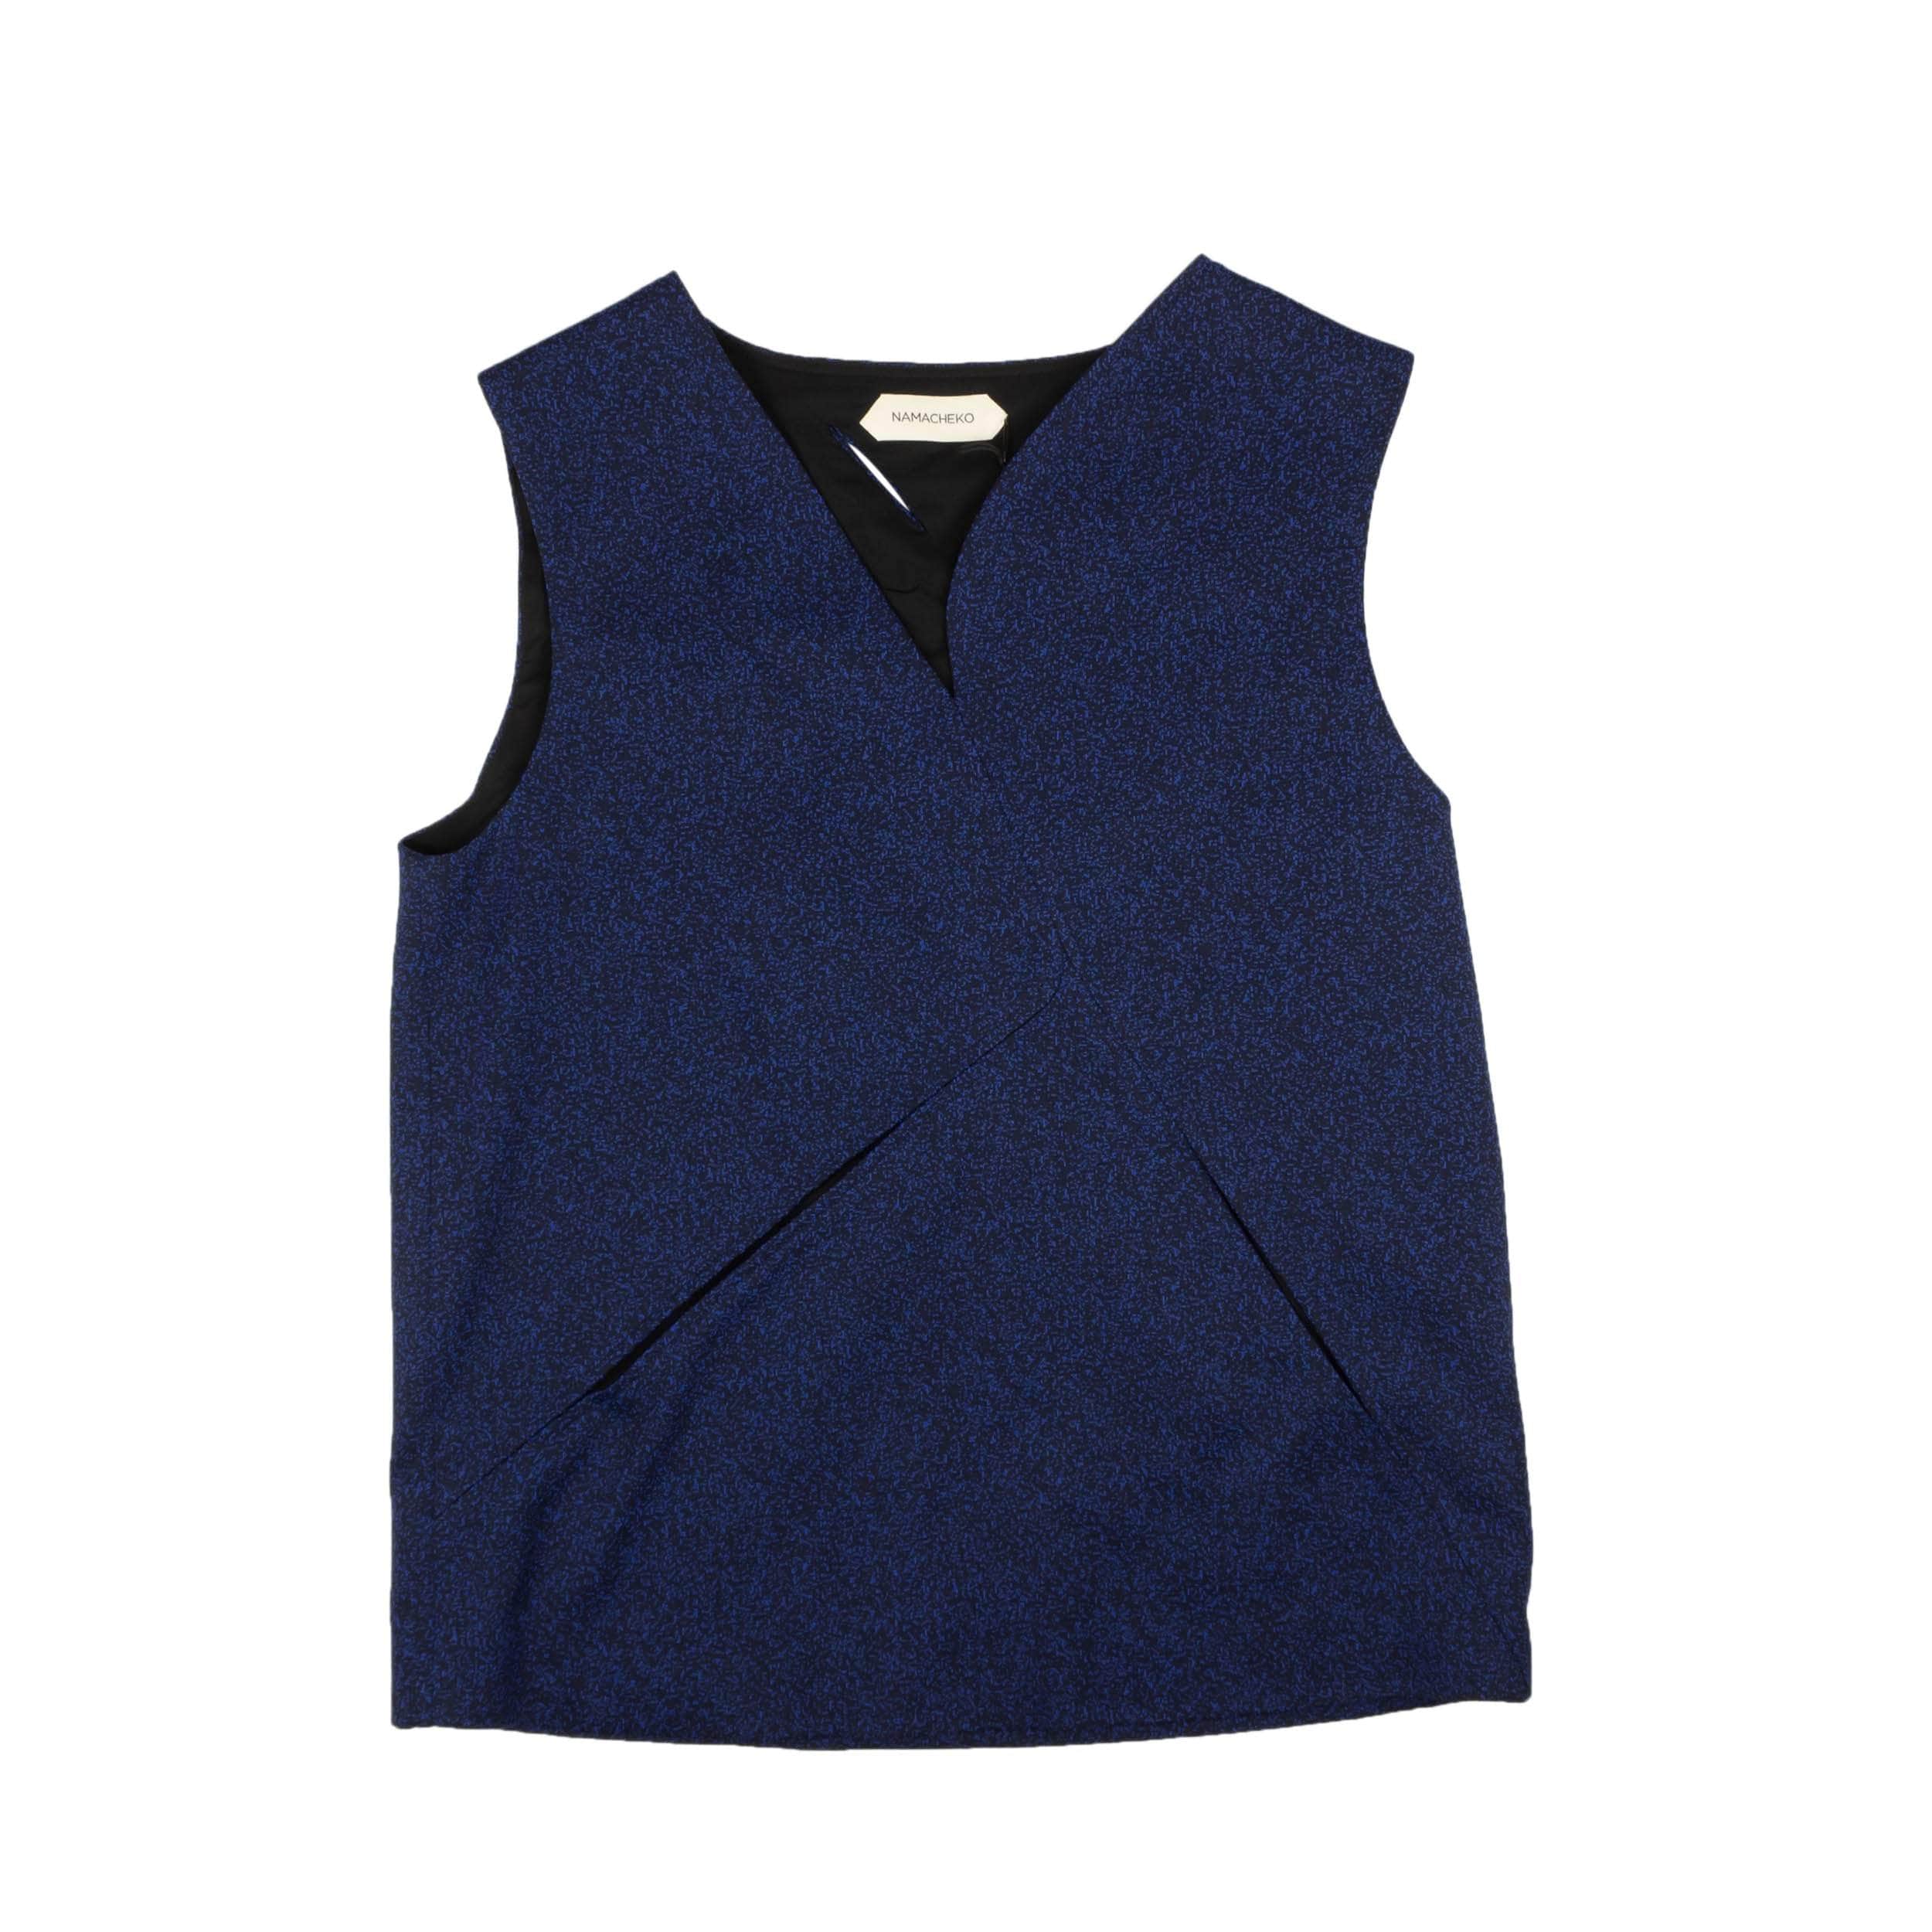 Namcheko 500-750, channelenable-all, chicmi, couponcollection, gender-mens, main-clothing, mens-shoes, mens-sweater-vests, namcheko, size-l, size-m, size-s Black And Blue Tasebar Sweater Vest